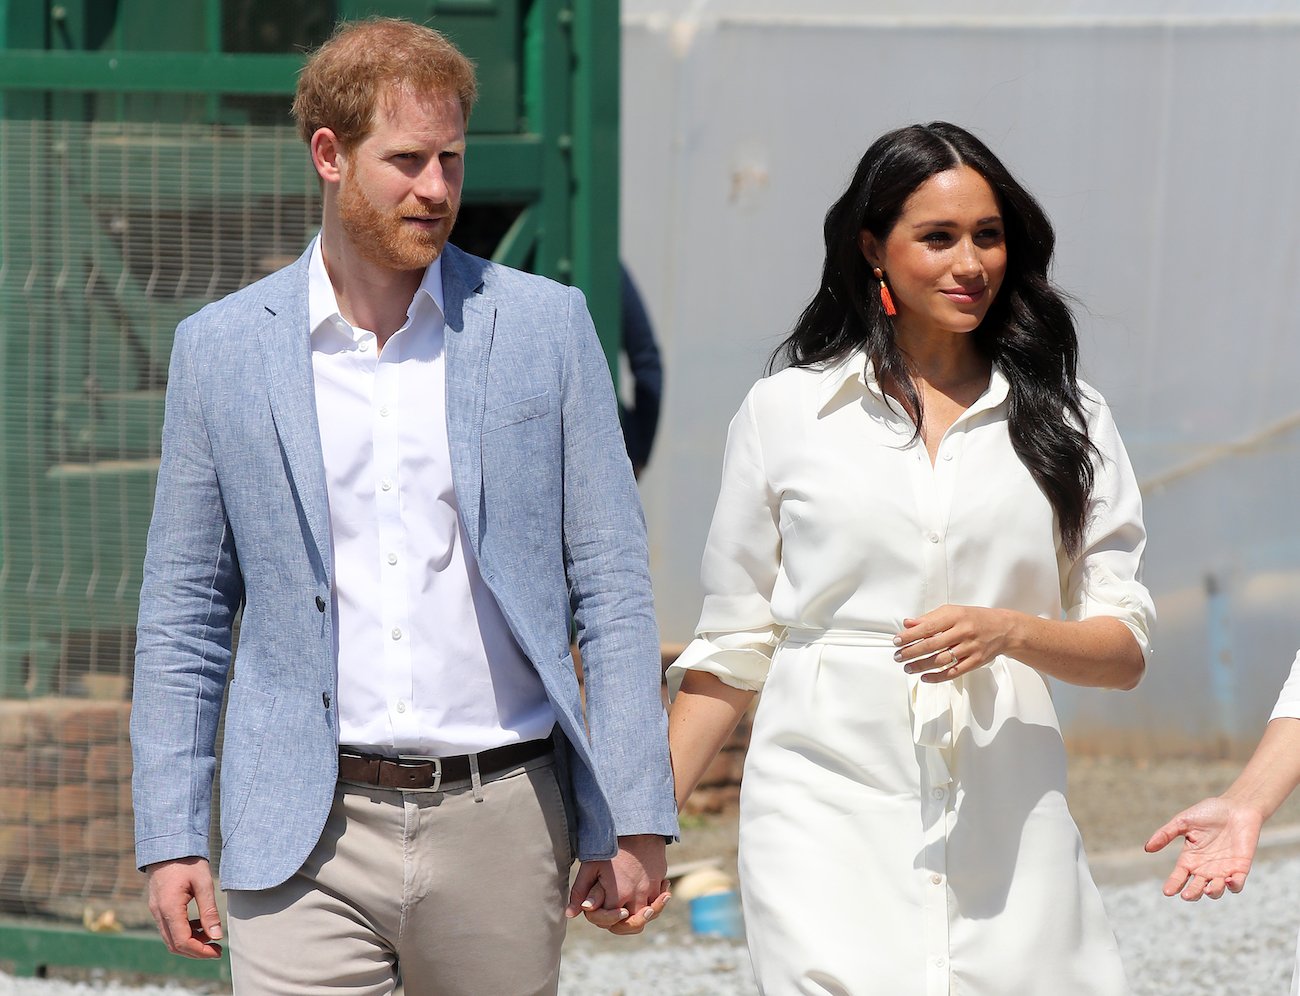 Prince Harry and Meghan Markle walking together holding hands with Harry wearing a light blue jacket and Meghan in a white shirt dress